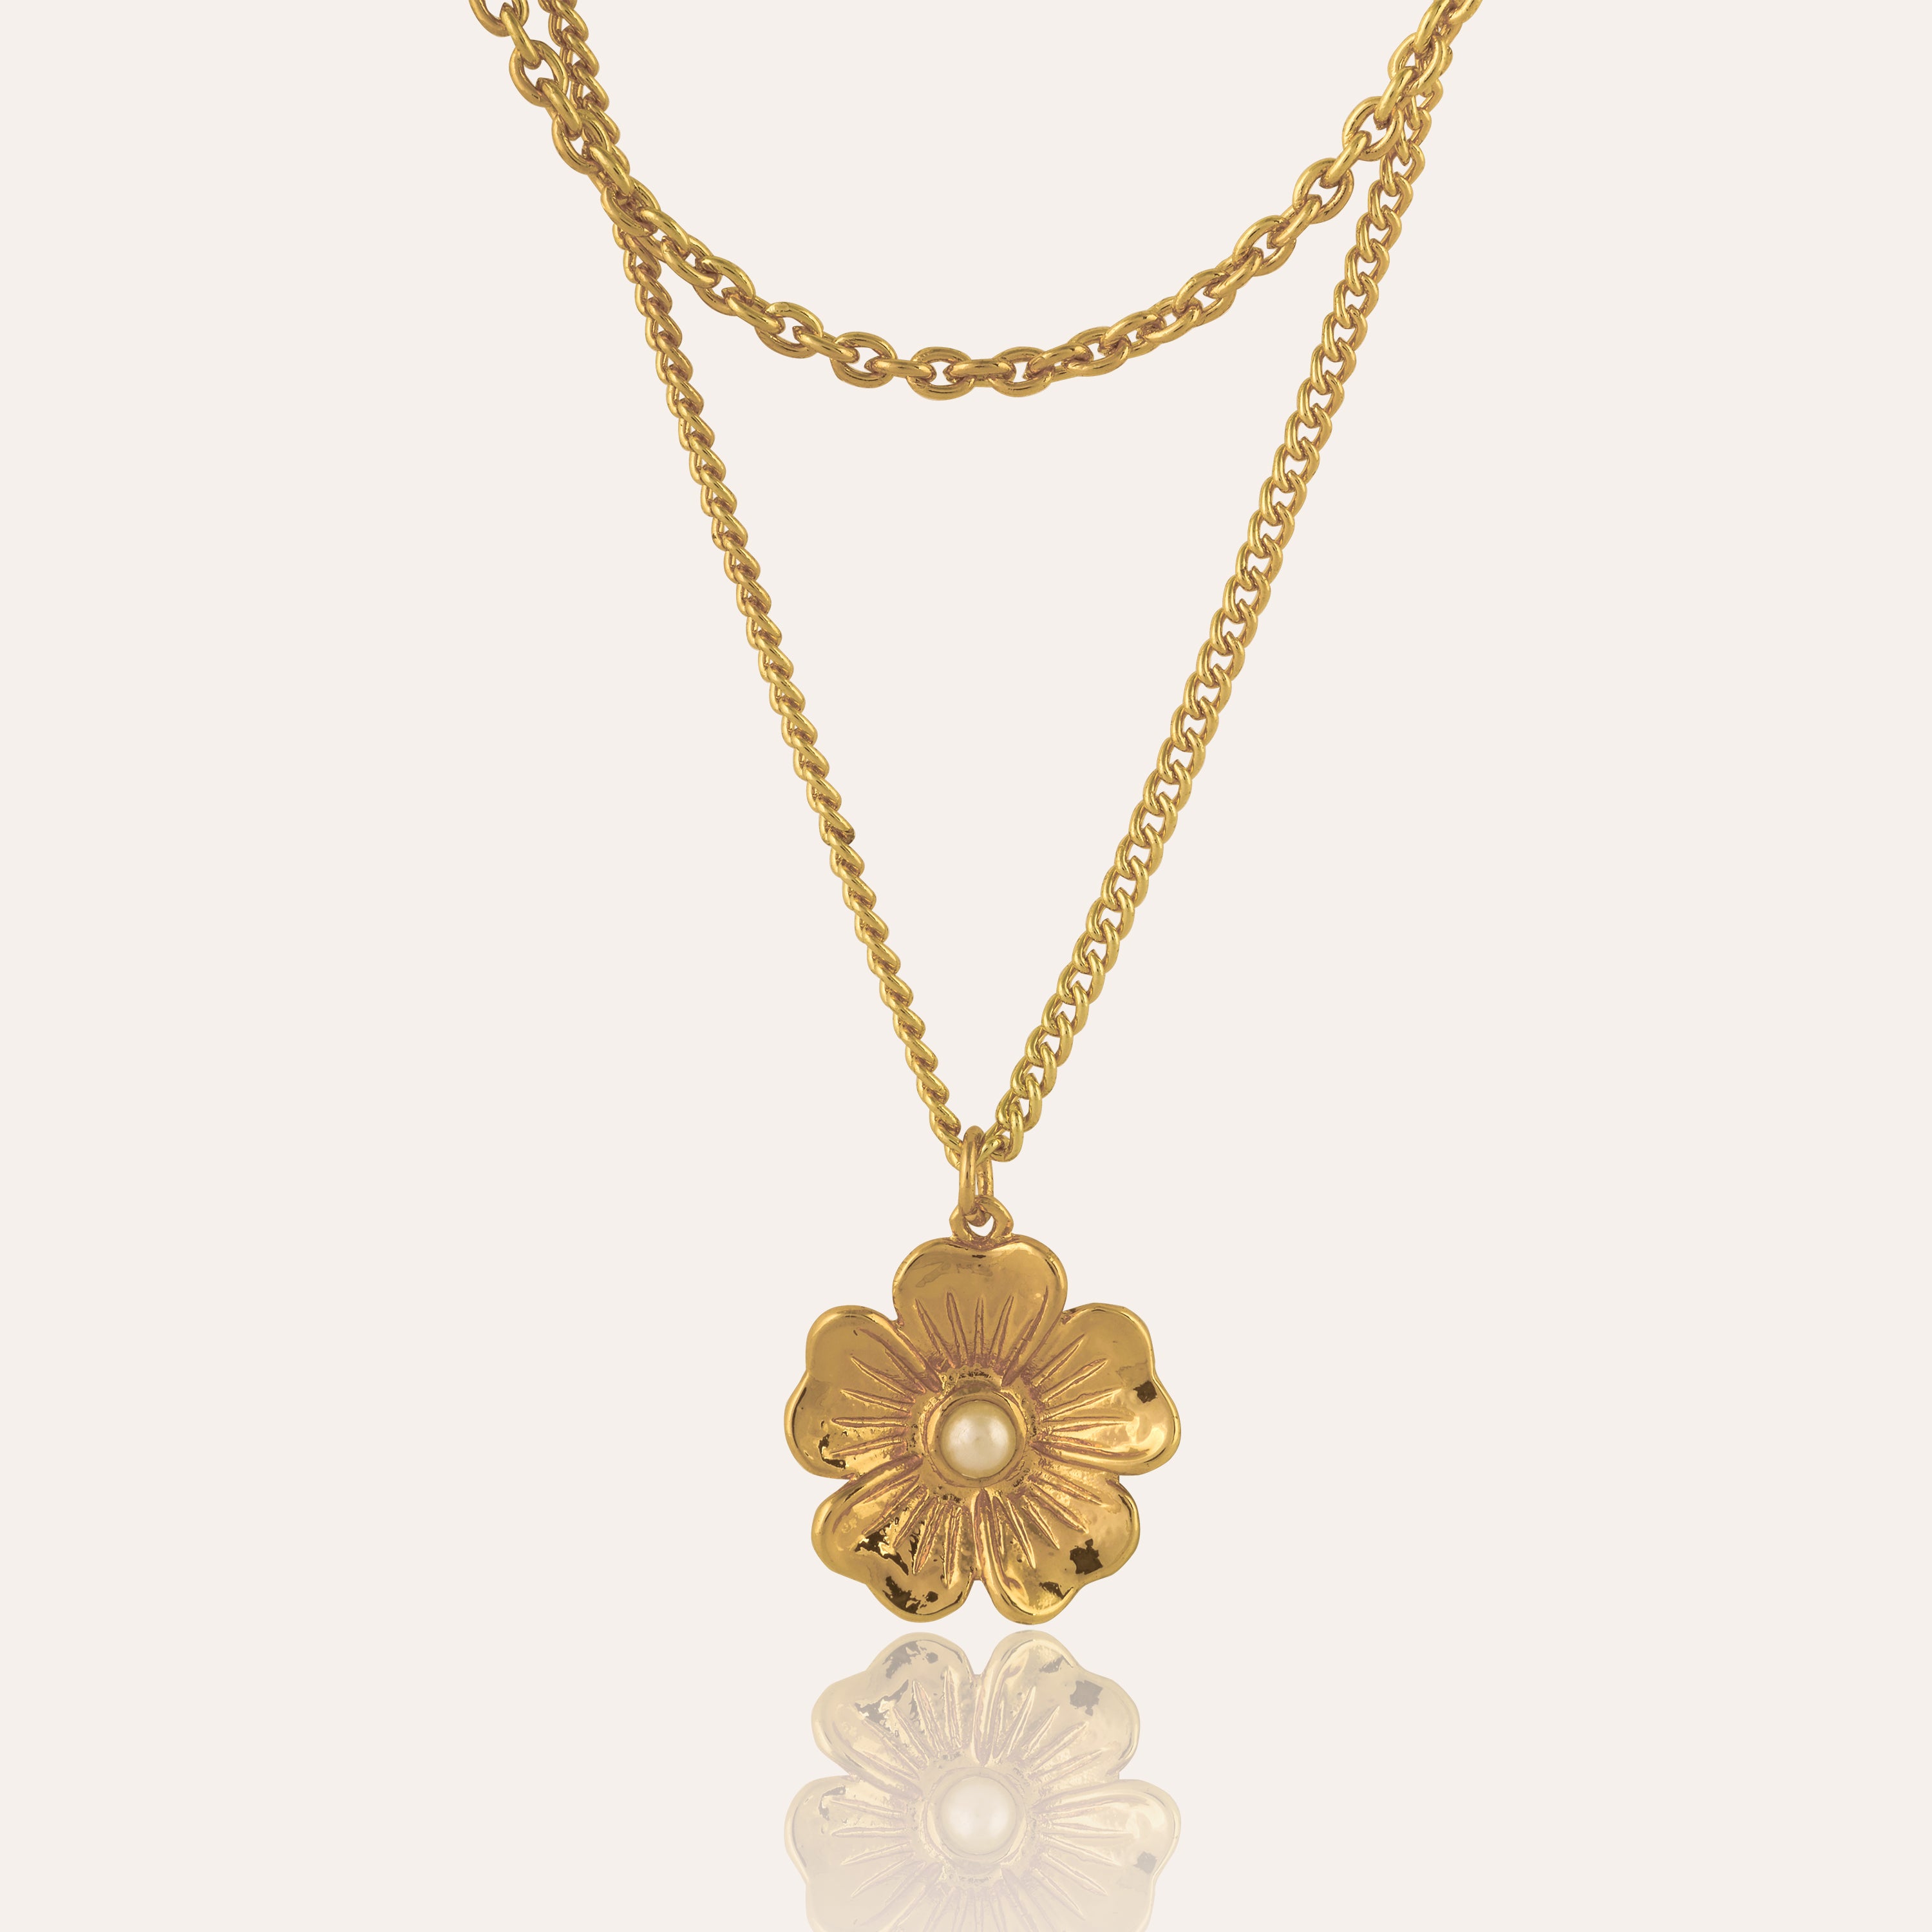 TFC Layered Chain Floral Gold Plated Necklace-Enhance your elegance with our collection of gold-plated necklaces for women. Choose from stunning pendant necklaces, chic choker necklaces, and trendy layered necklaces. Our sleek and dainty designs are both affordable and anti-tarnish, ensuring lasting beauty. Enjoy the cheapest fashion jewellery, lightweight and stylish- only at The Fun Company